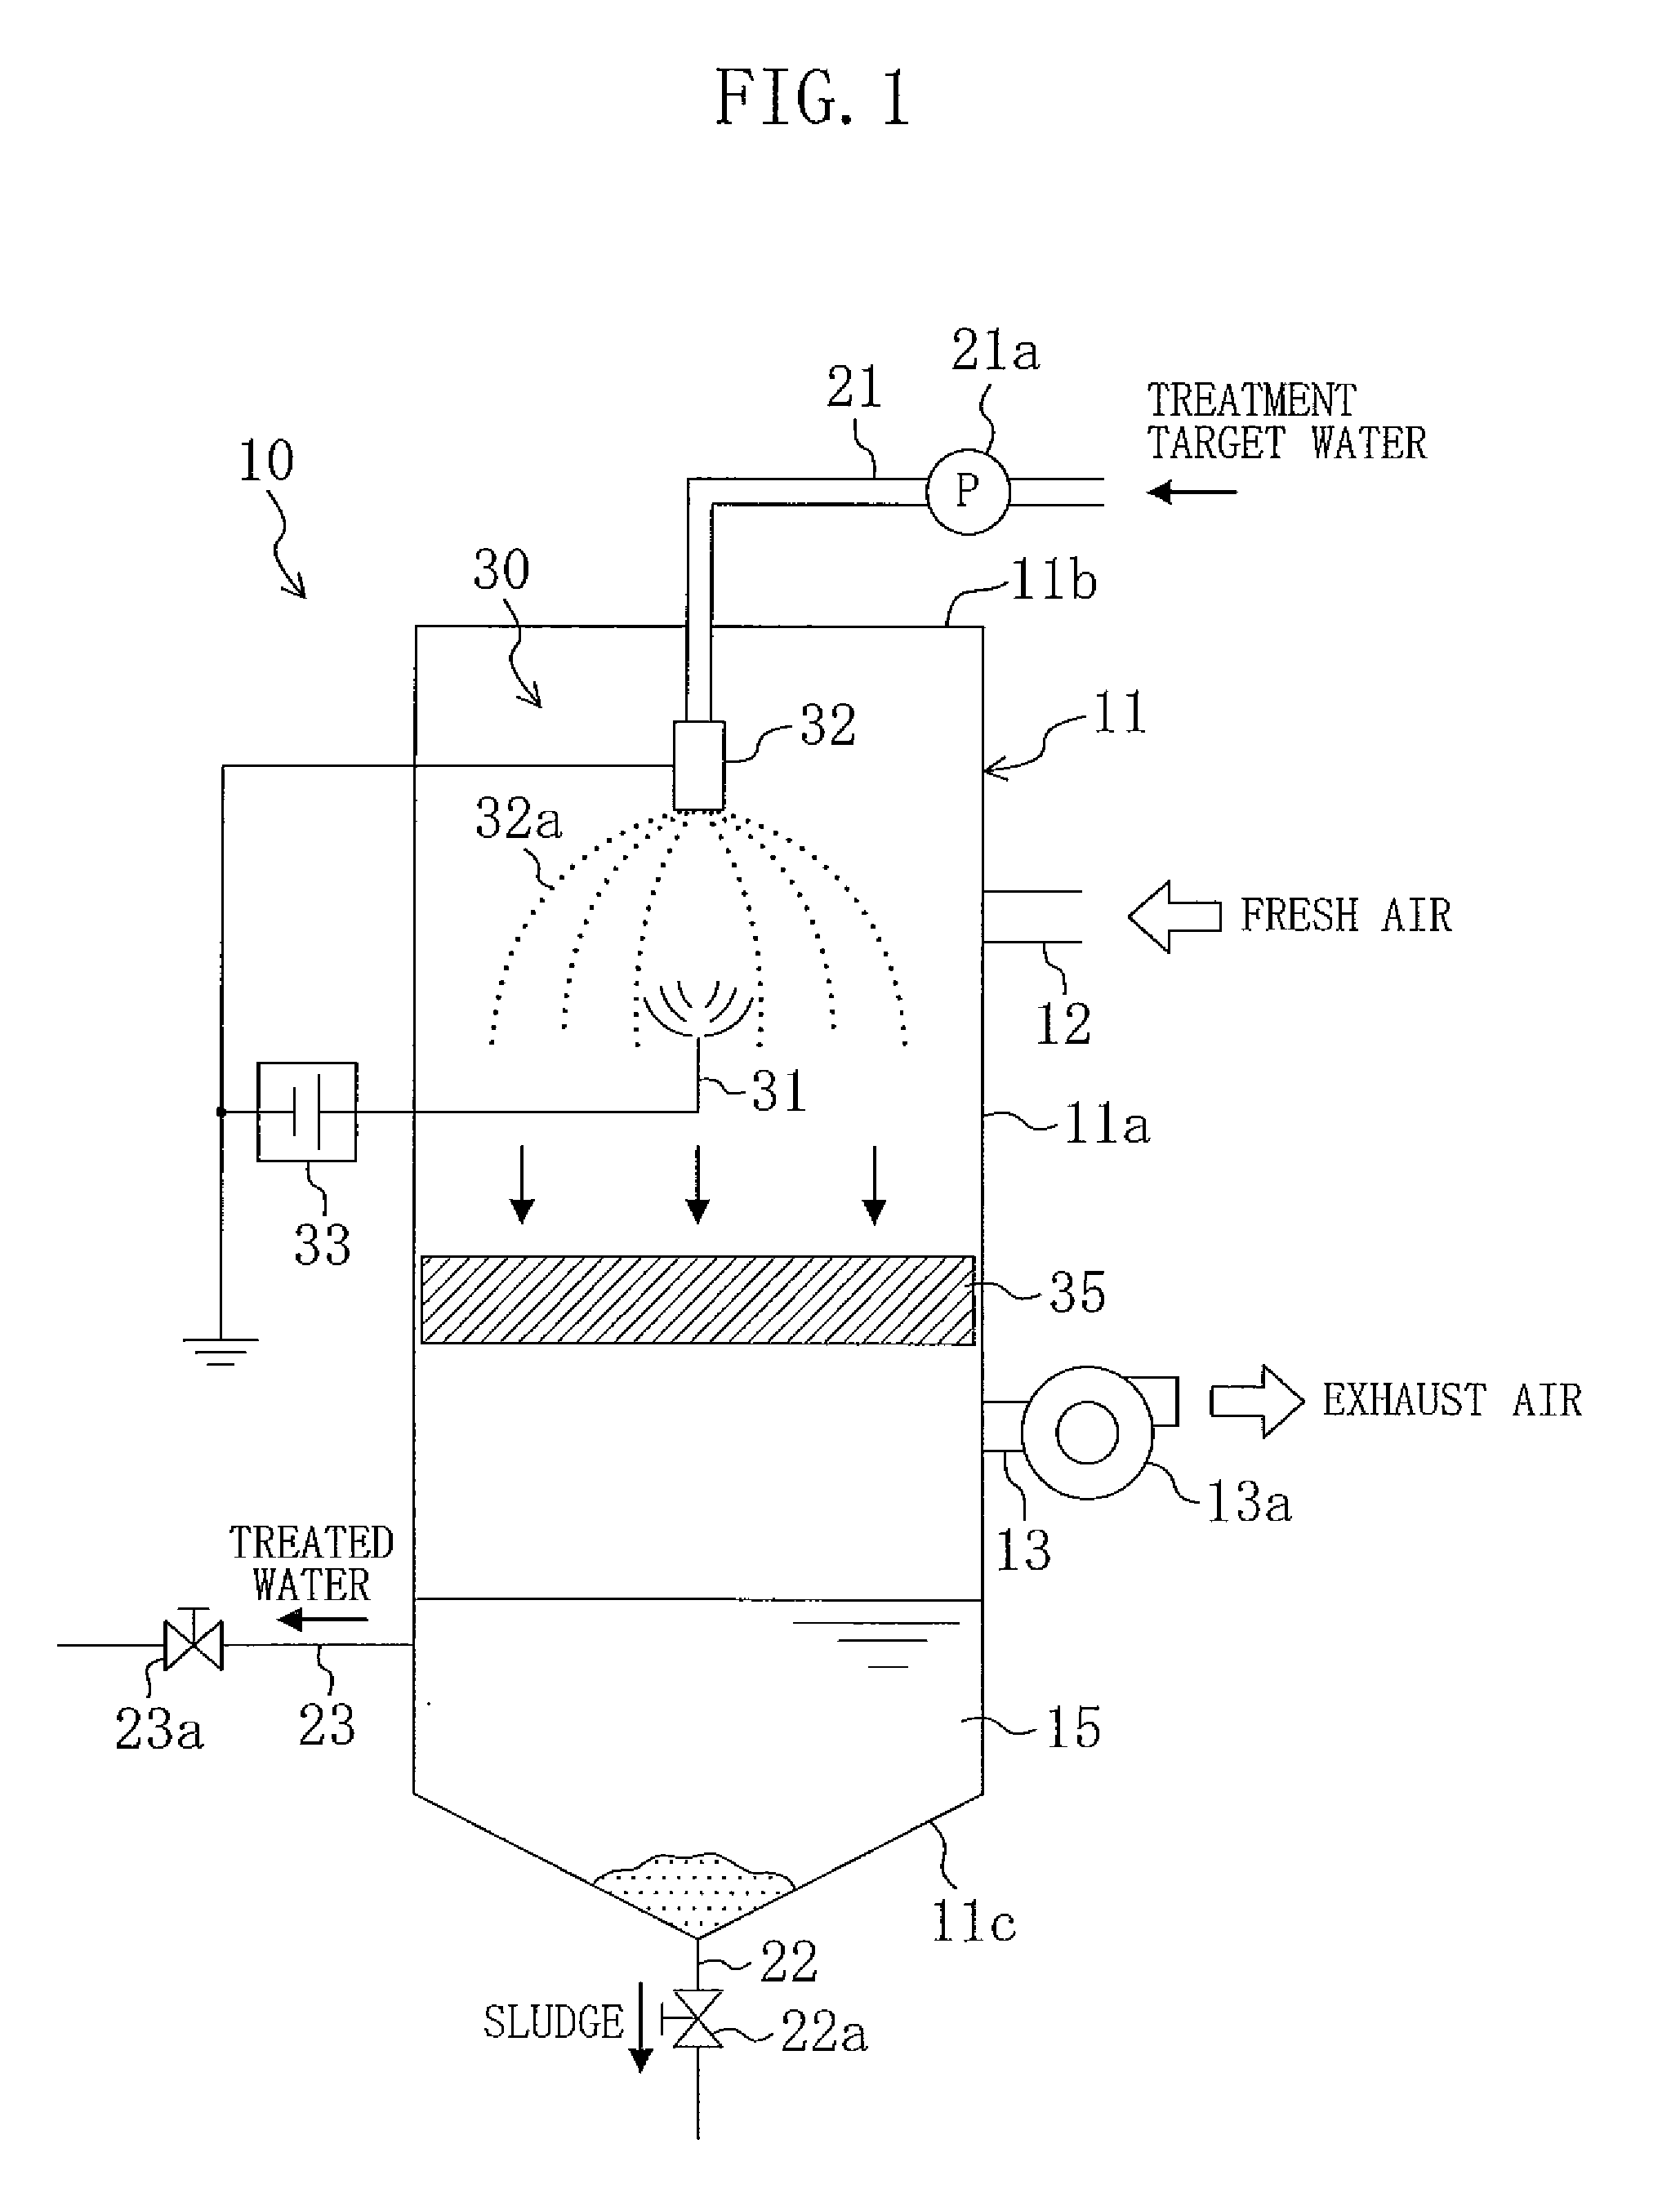 Liquid treatment apparatus, air conditioning system, and humidifier